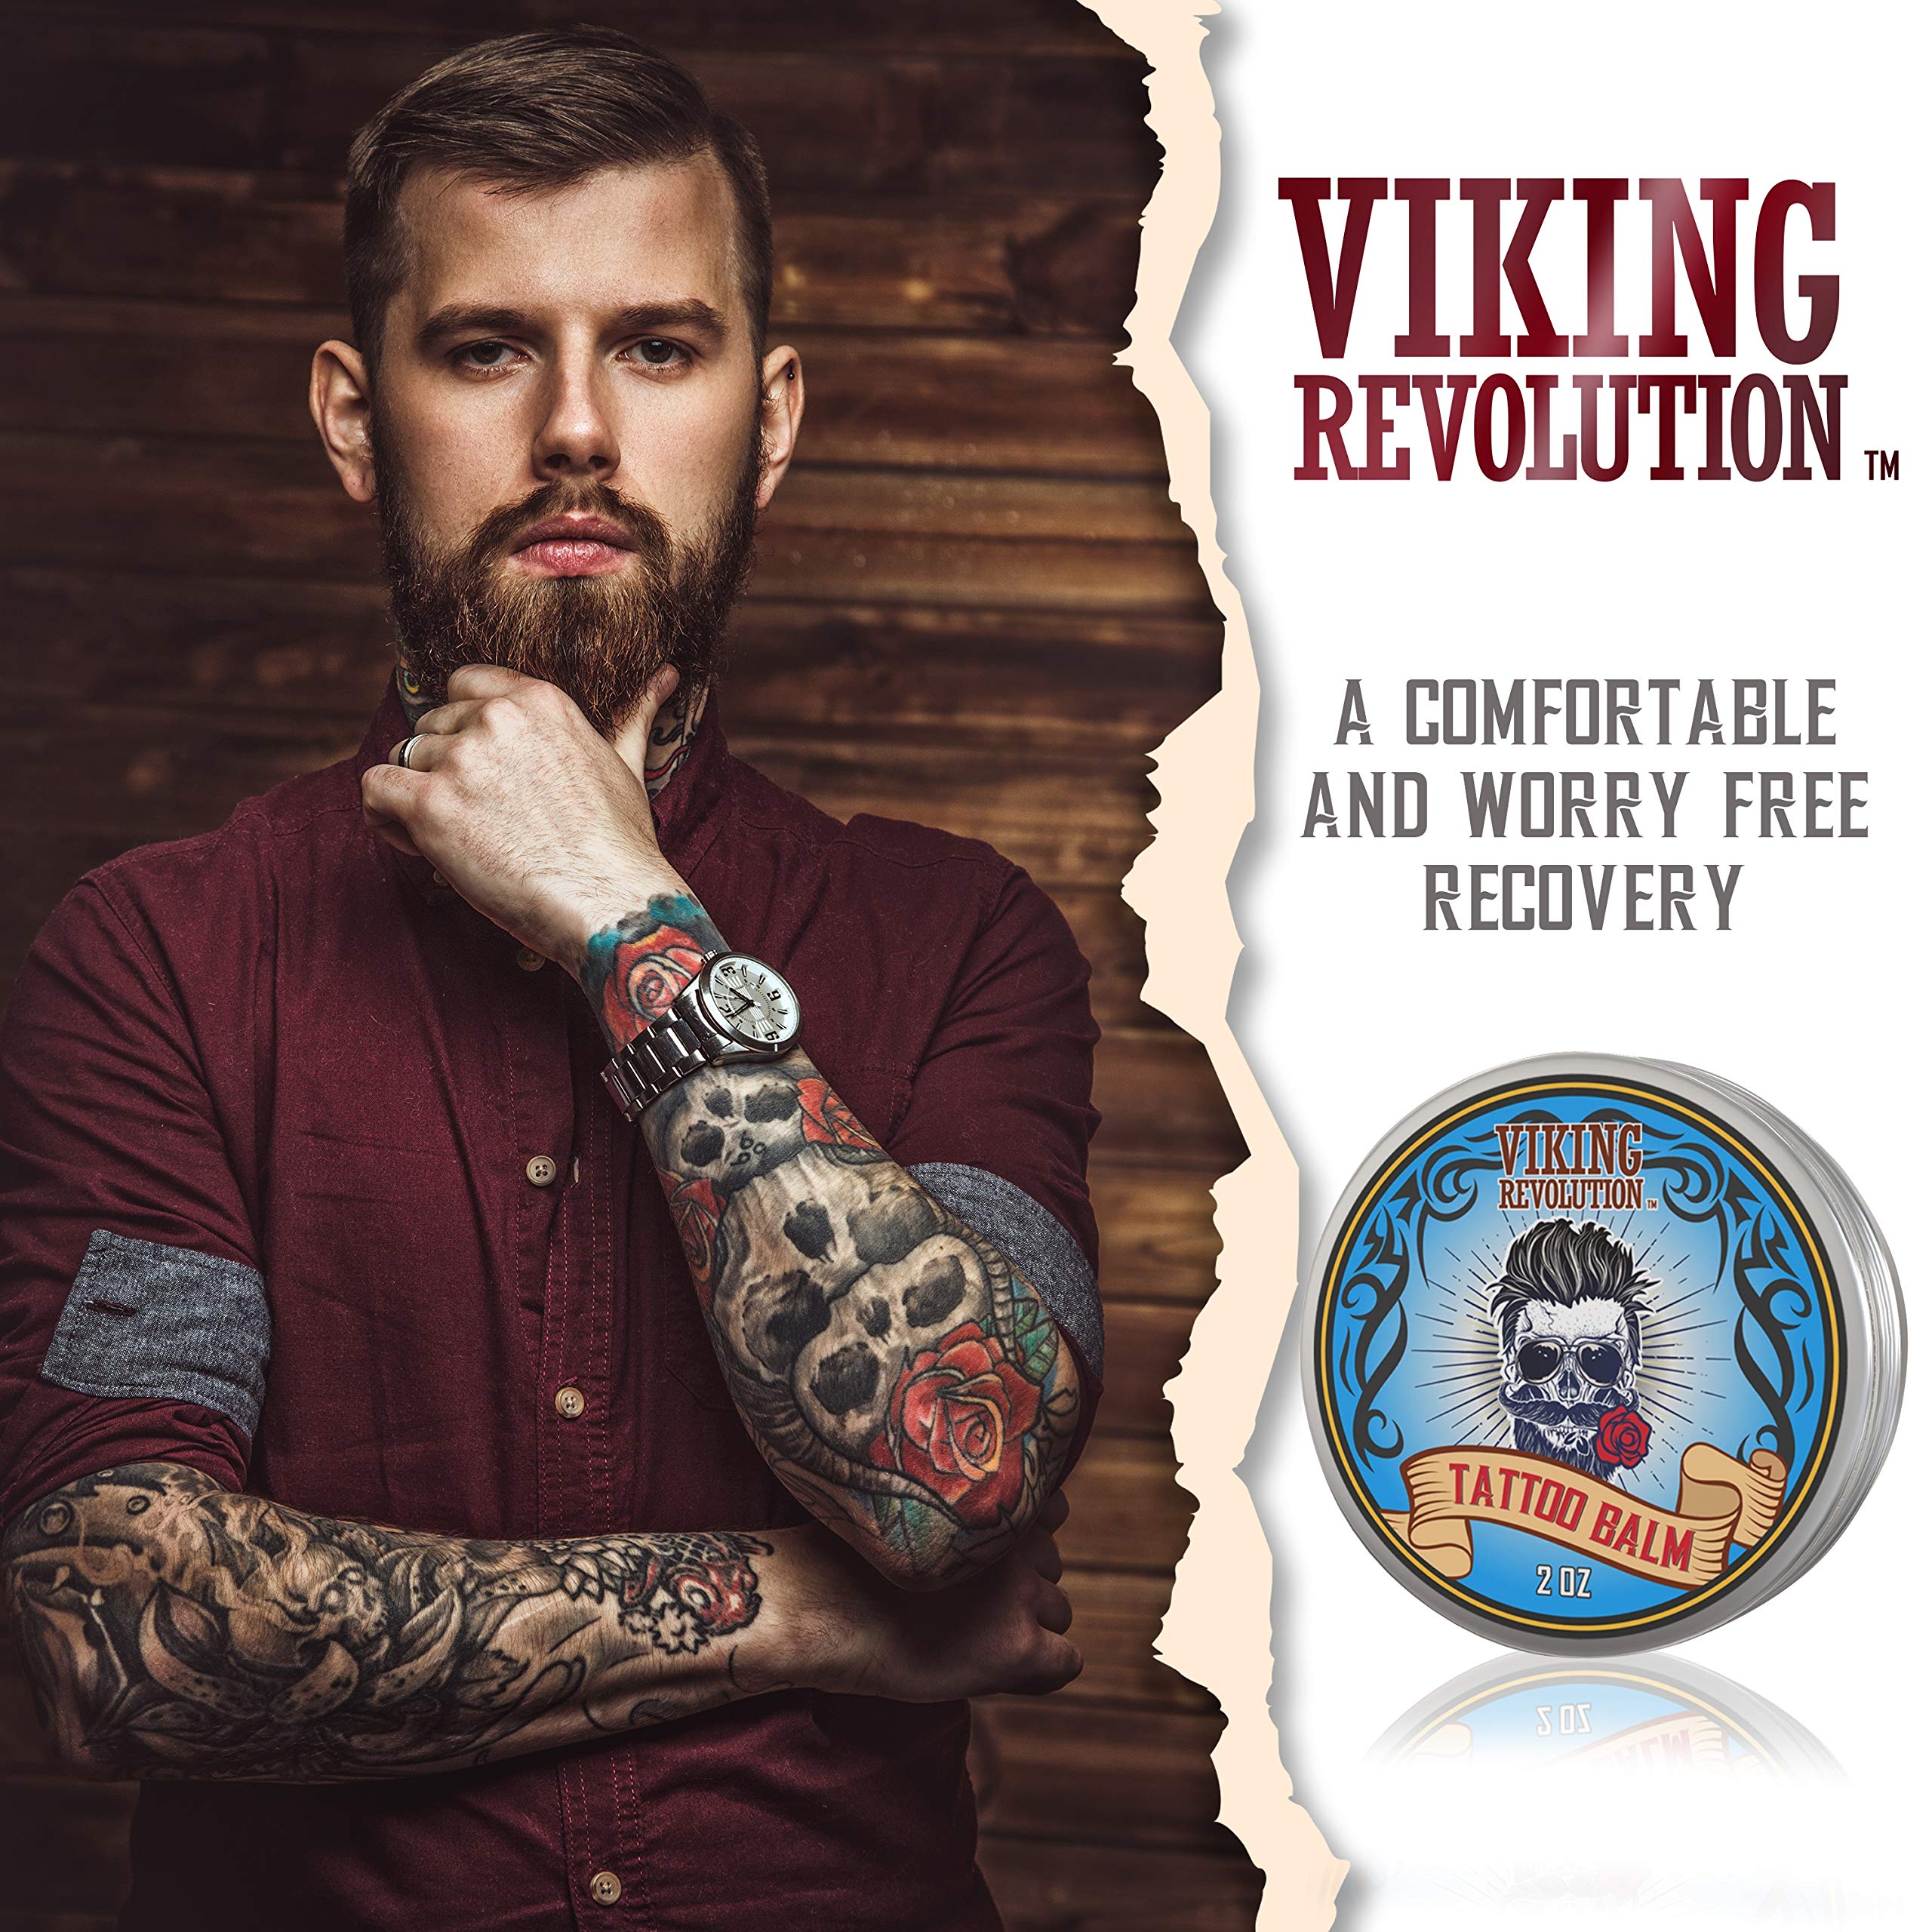 Viking Revolution Tattoo Care Balm for Before, During & Post Tattoo Safe, Natural Tattoo Aftercare Cream Moisturizing Lotion to Promote Skin Healing, Skin Moisturizer, 2oz, 1 Count (Pack of 1)